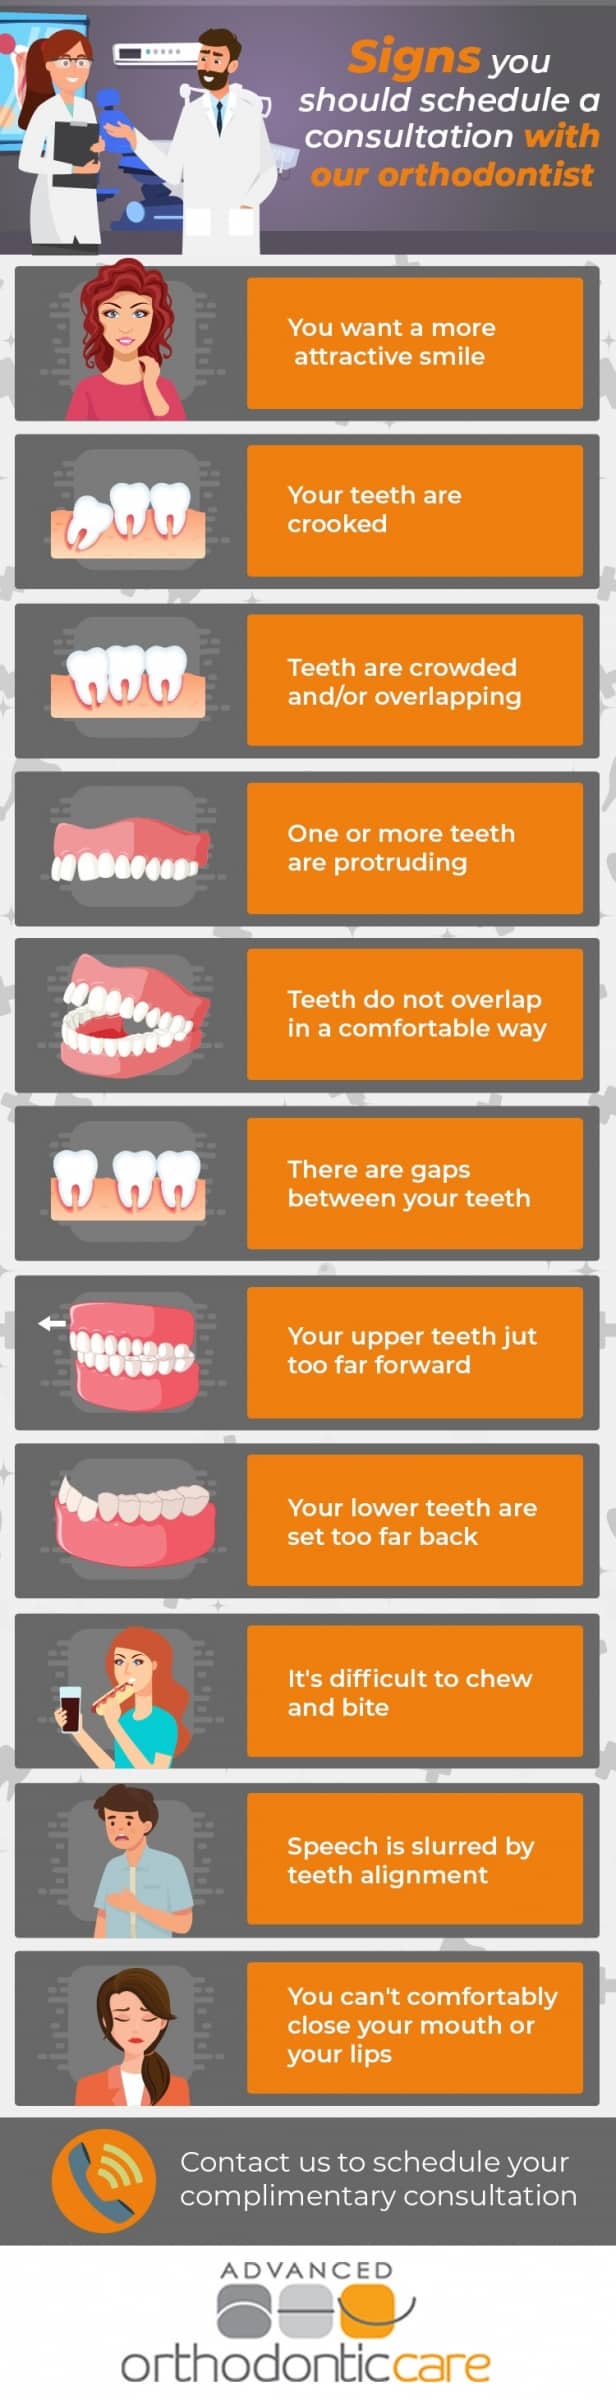 Infographic showing the reasons you should visit an orthodontist such crowded teeth